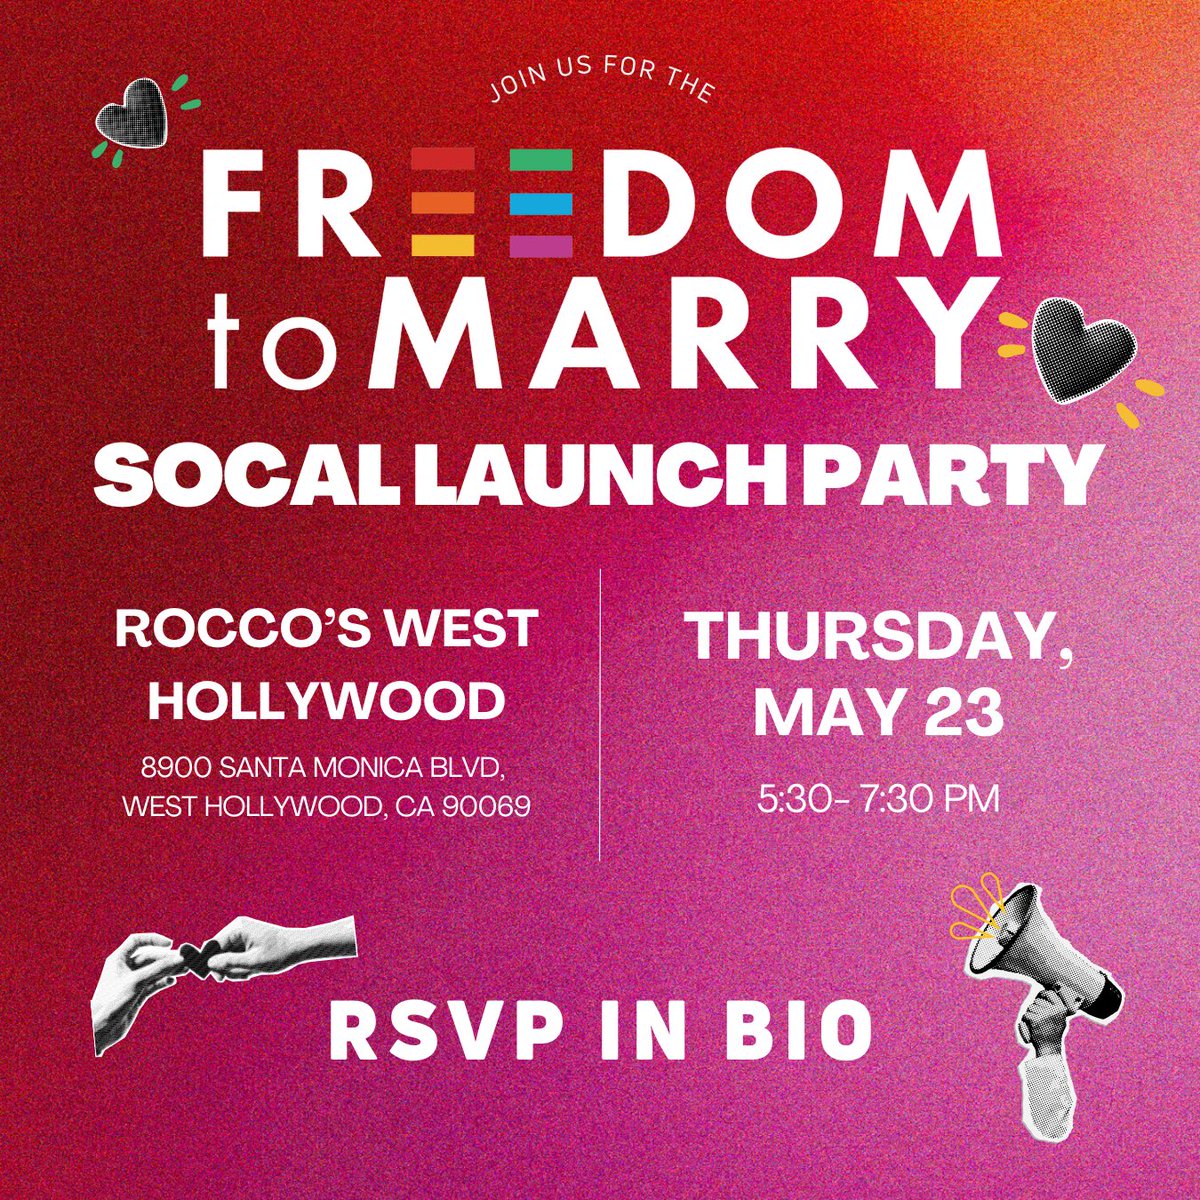 You’re invited! 🩷 Join us this Thursday from 5:30-7:30 PM at Rocco’s in West Hollywood for our campaign Launch Party! 🕺🪩🌈 RSVP link in our bio and learn more about the campaign at FreedomtoMarryCA.com.